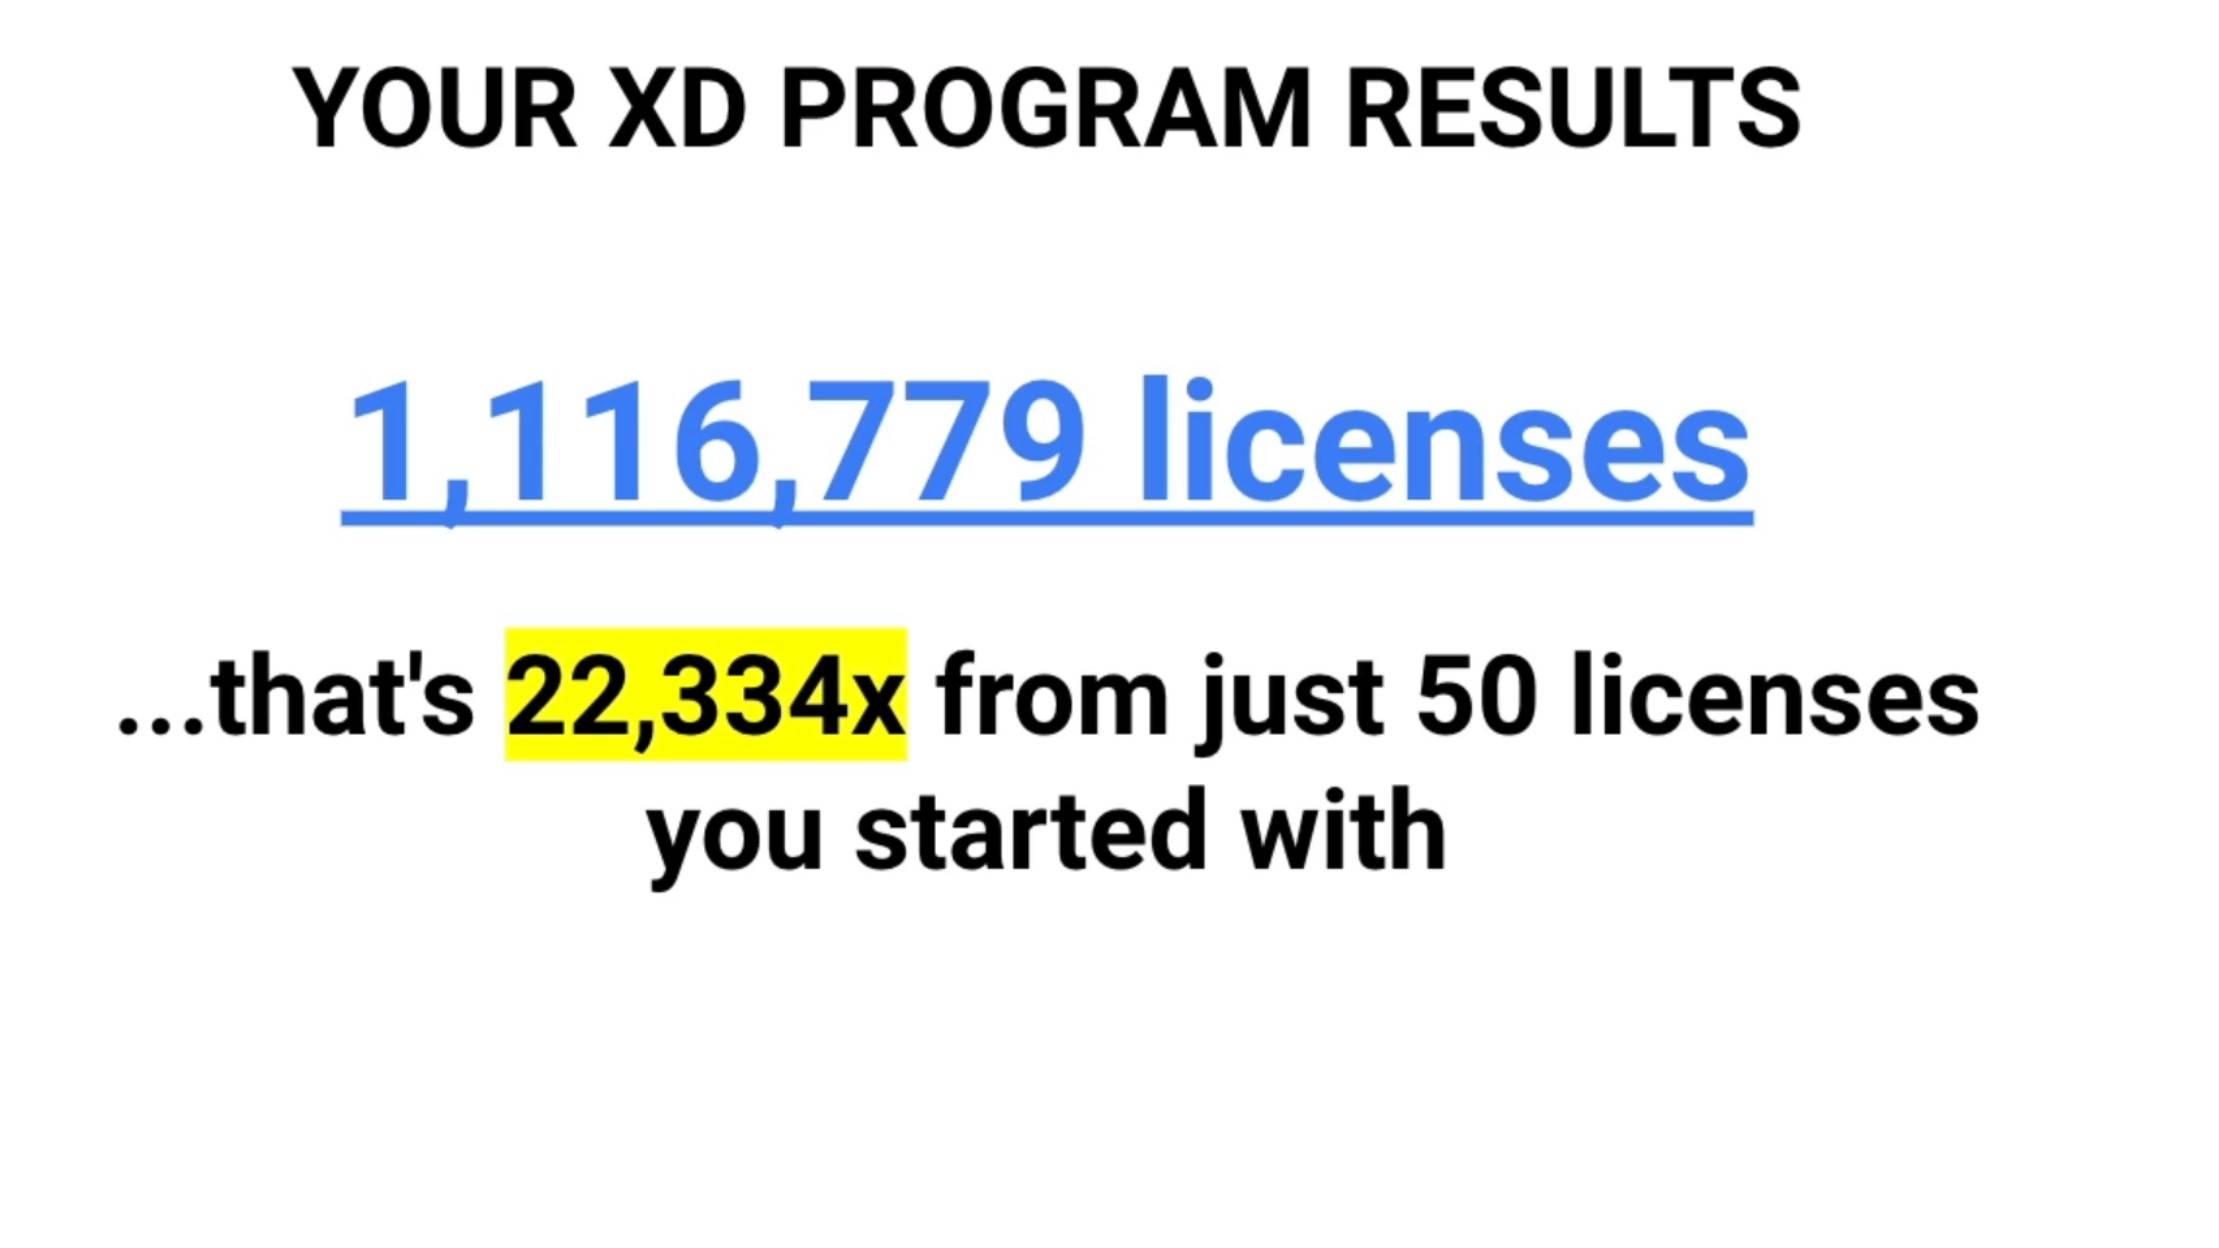 xD Program Results after 2 years